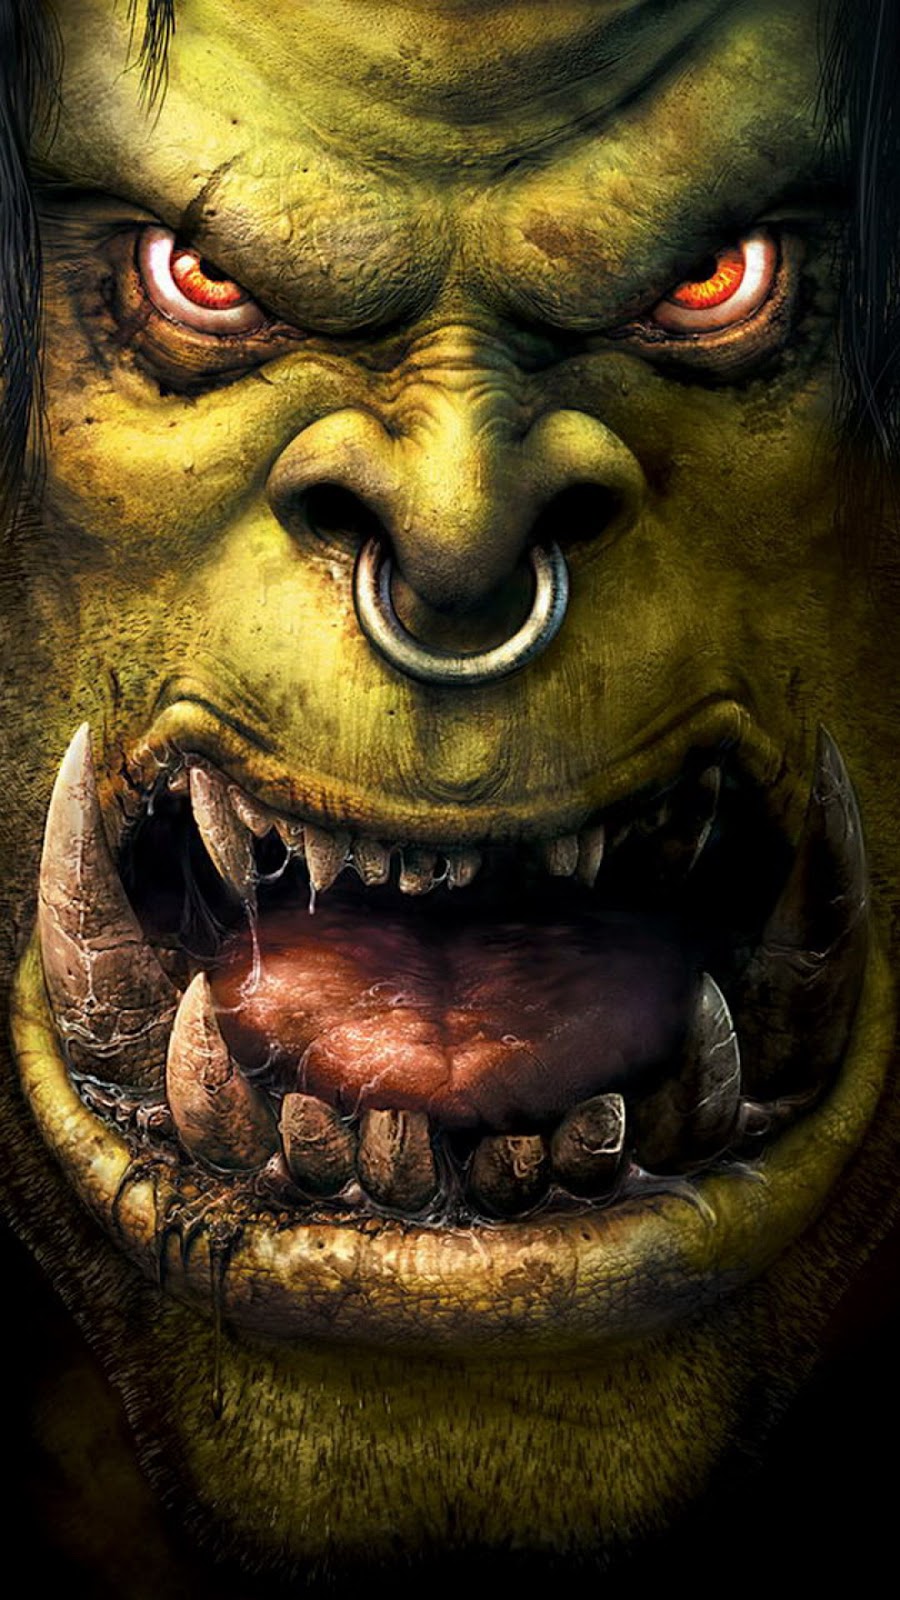 Wallpaper Android Monster Hijau